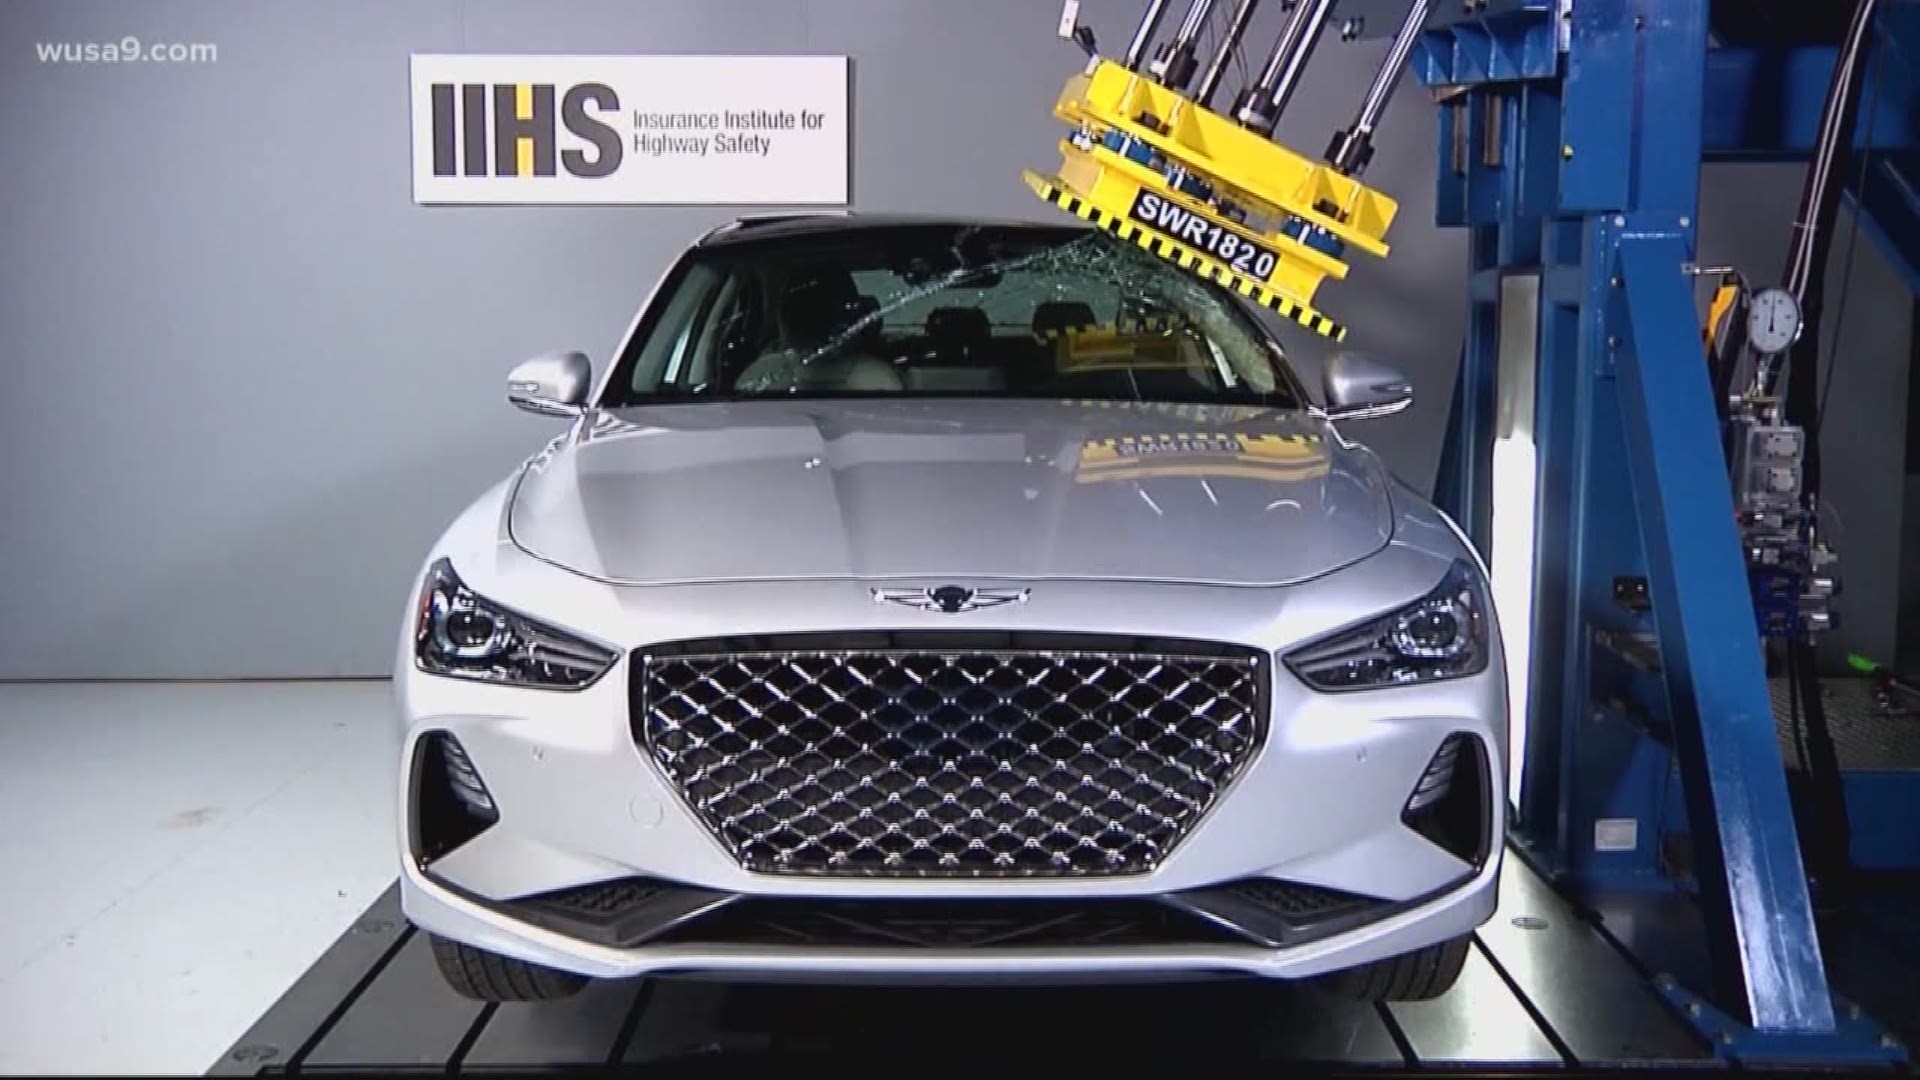 hele Vend tilbage Pil 2020 Top Safety Picks: Here are the safest cars to drive | wusa9.com